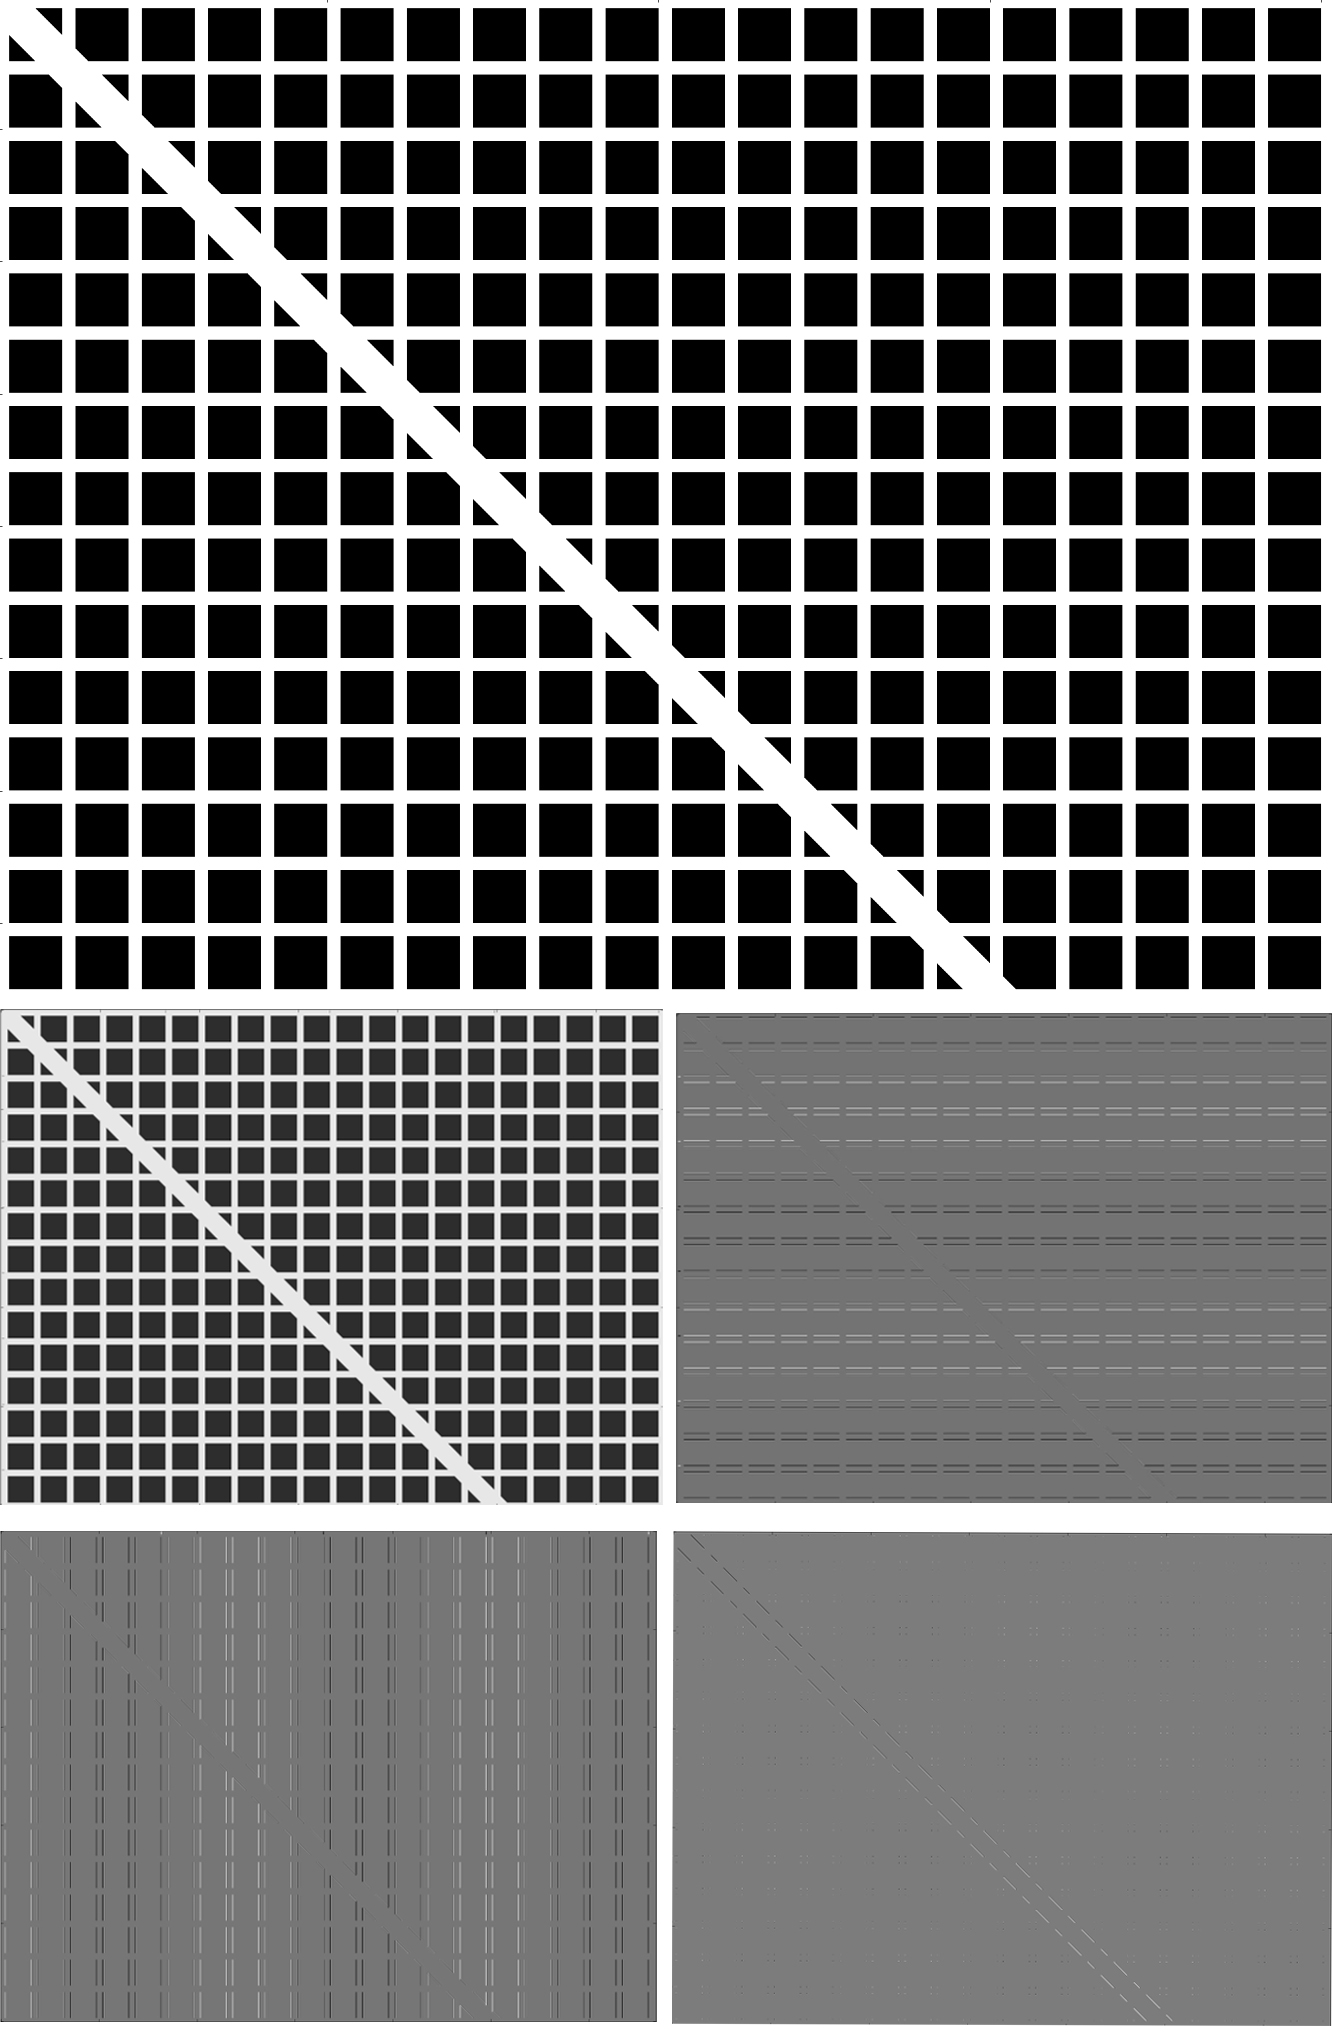 The original image (top, 996×1332 pixels) is transformed using routine into the four coefficient (approximation, horizontal, vertical and diagonal) matrices (501×669) displayed below the original. The transformation was performed using the Daubechies wavelet with four vanishing moments and half-point end extension. Note that the approximation coefficients are a very close representation of the original image, while the horizontal, vertical and diagonal features of the image are visible in the respective coefficient matrices.